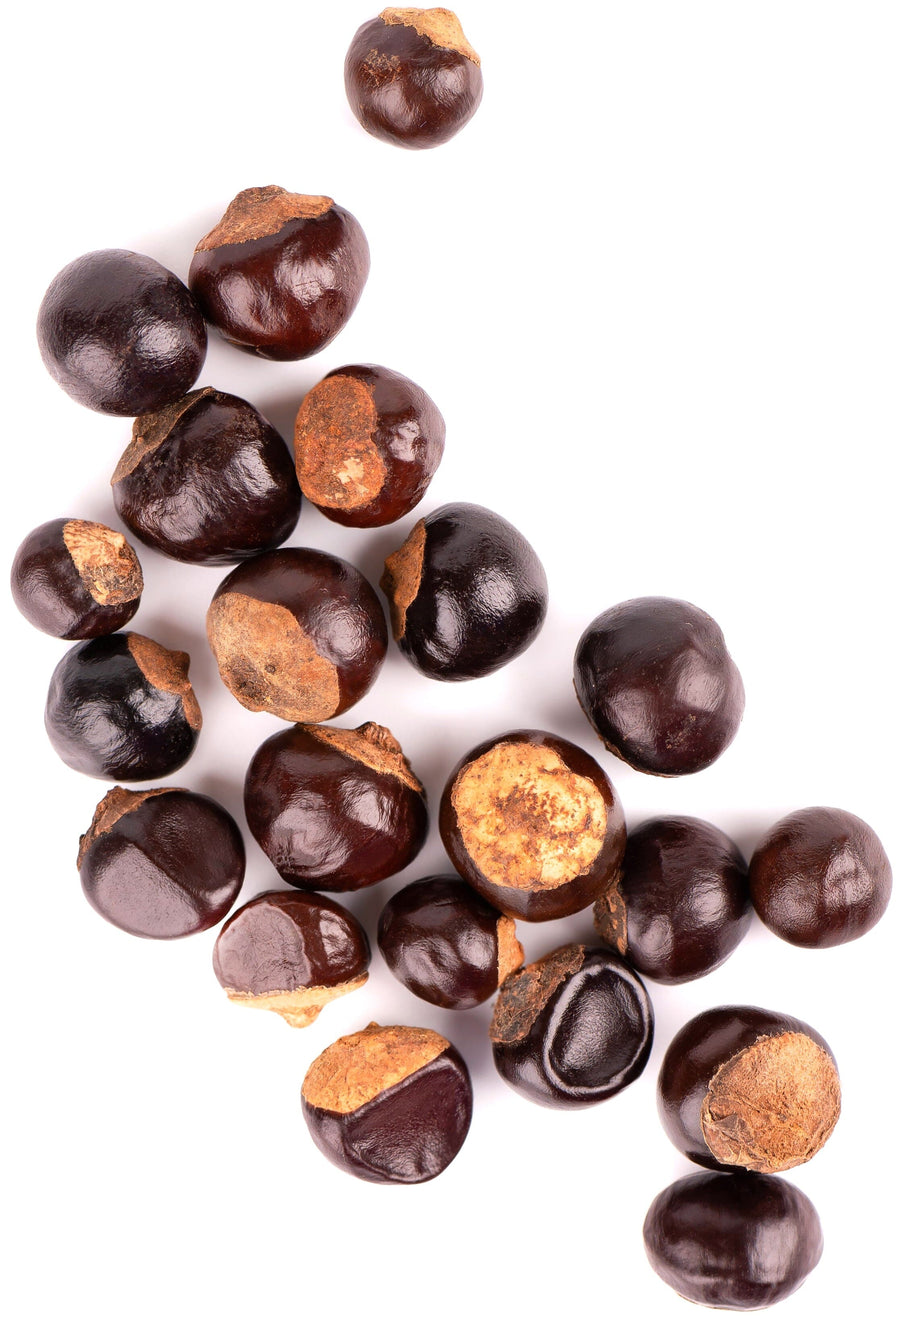 Image of a pile of Guarana Seeds